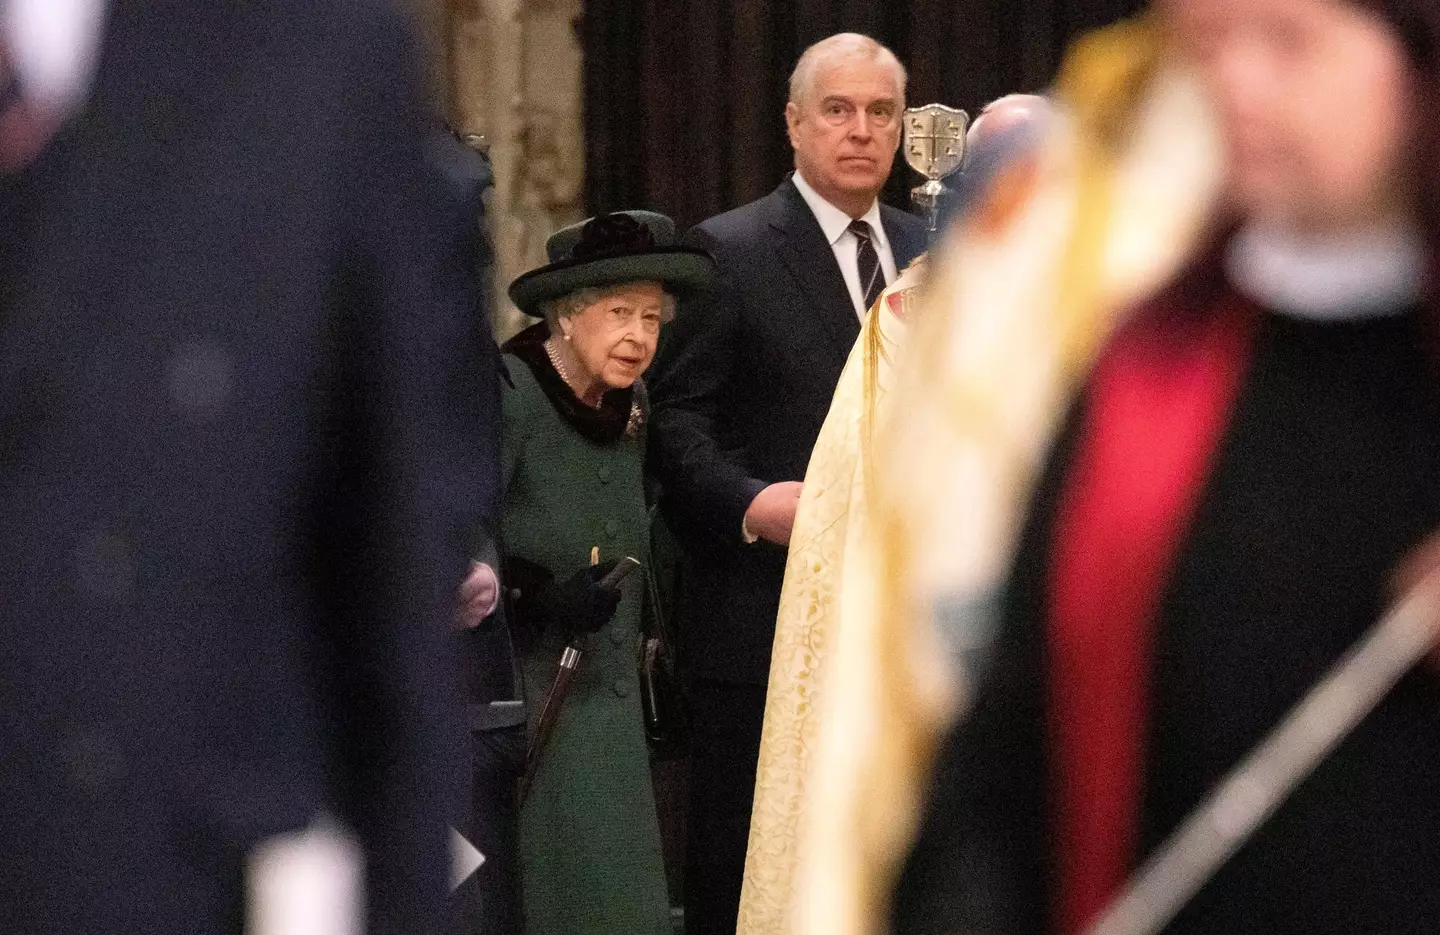 The photo of the Queen's arrival at Westminster Abbey almost didn't exist (